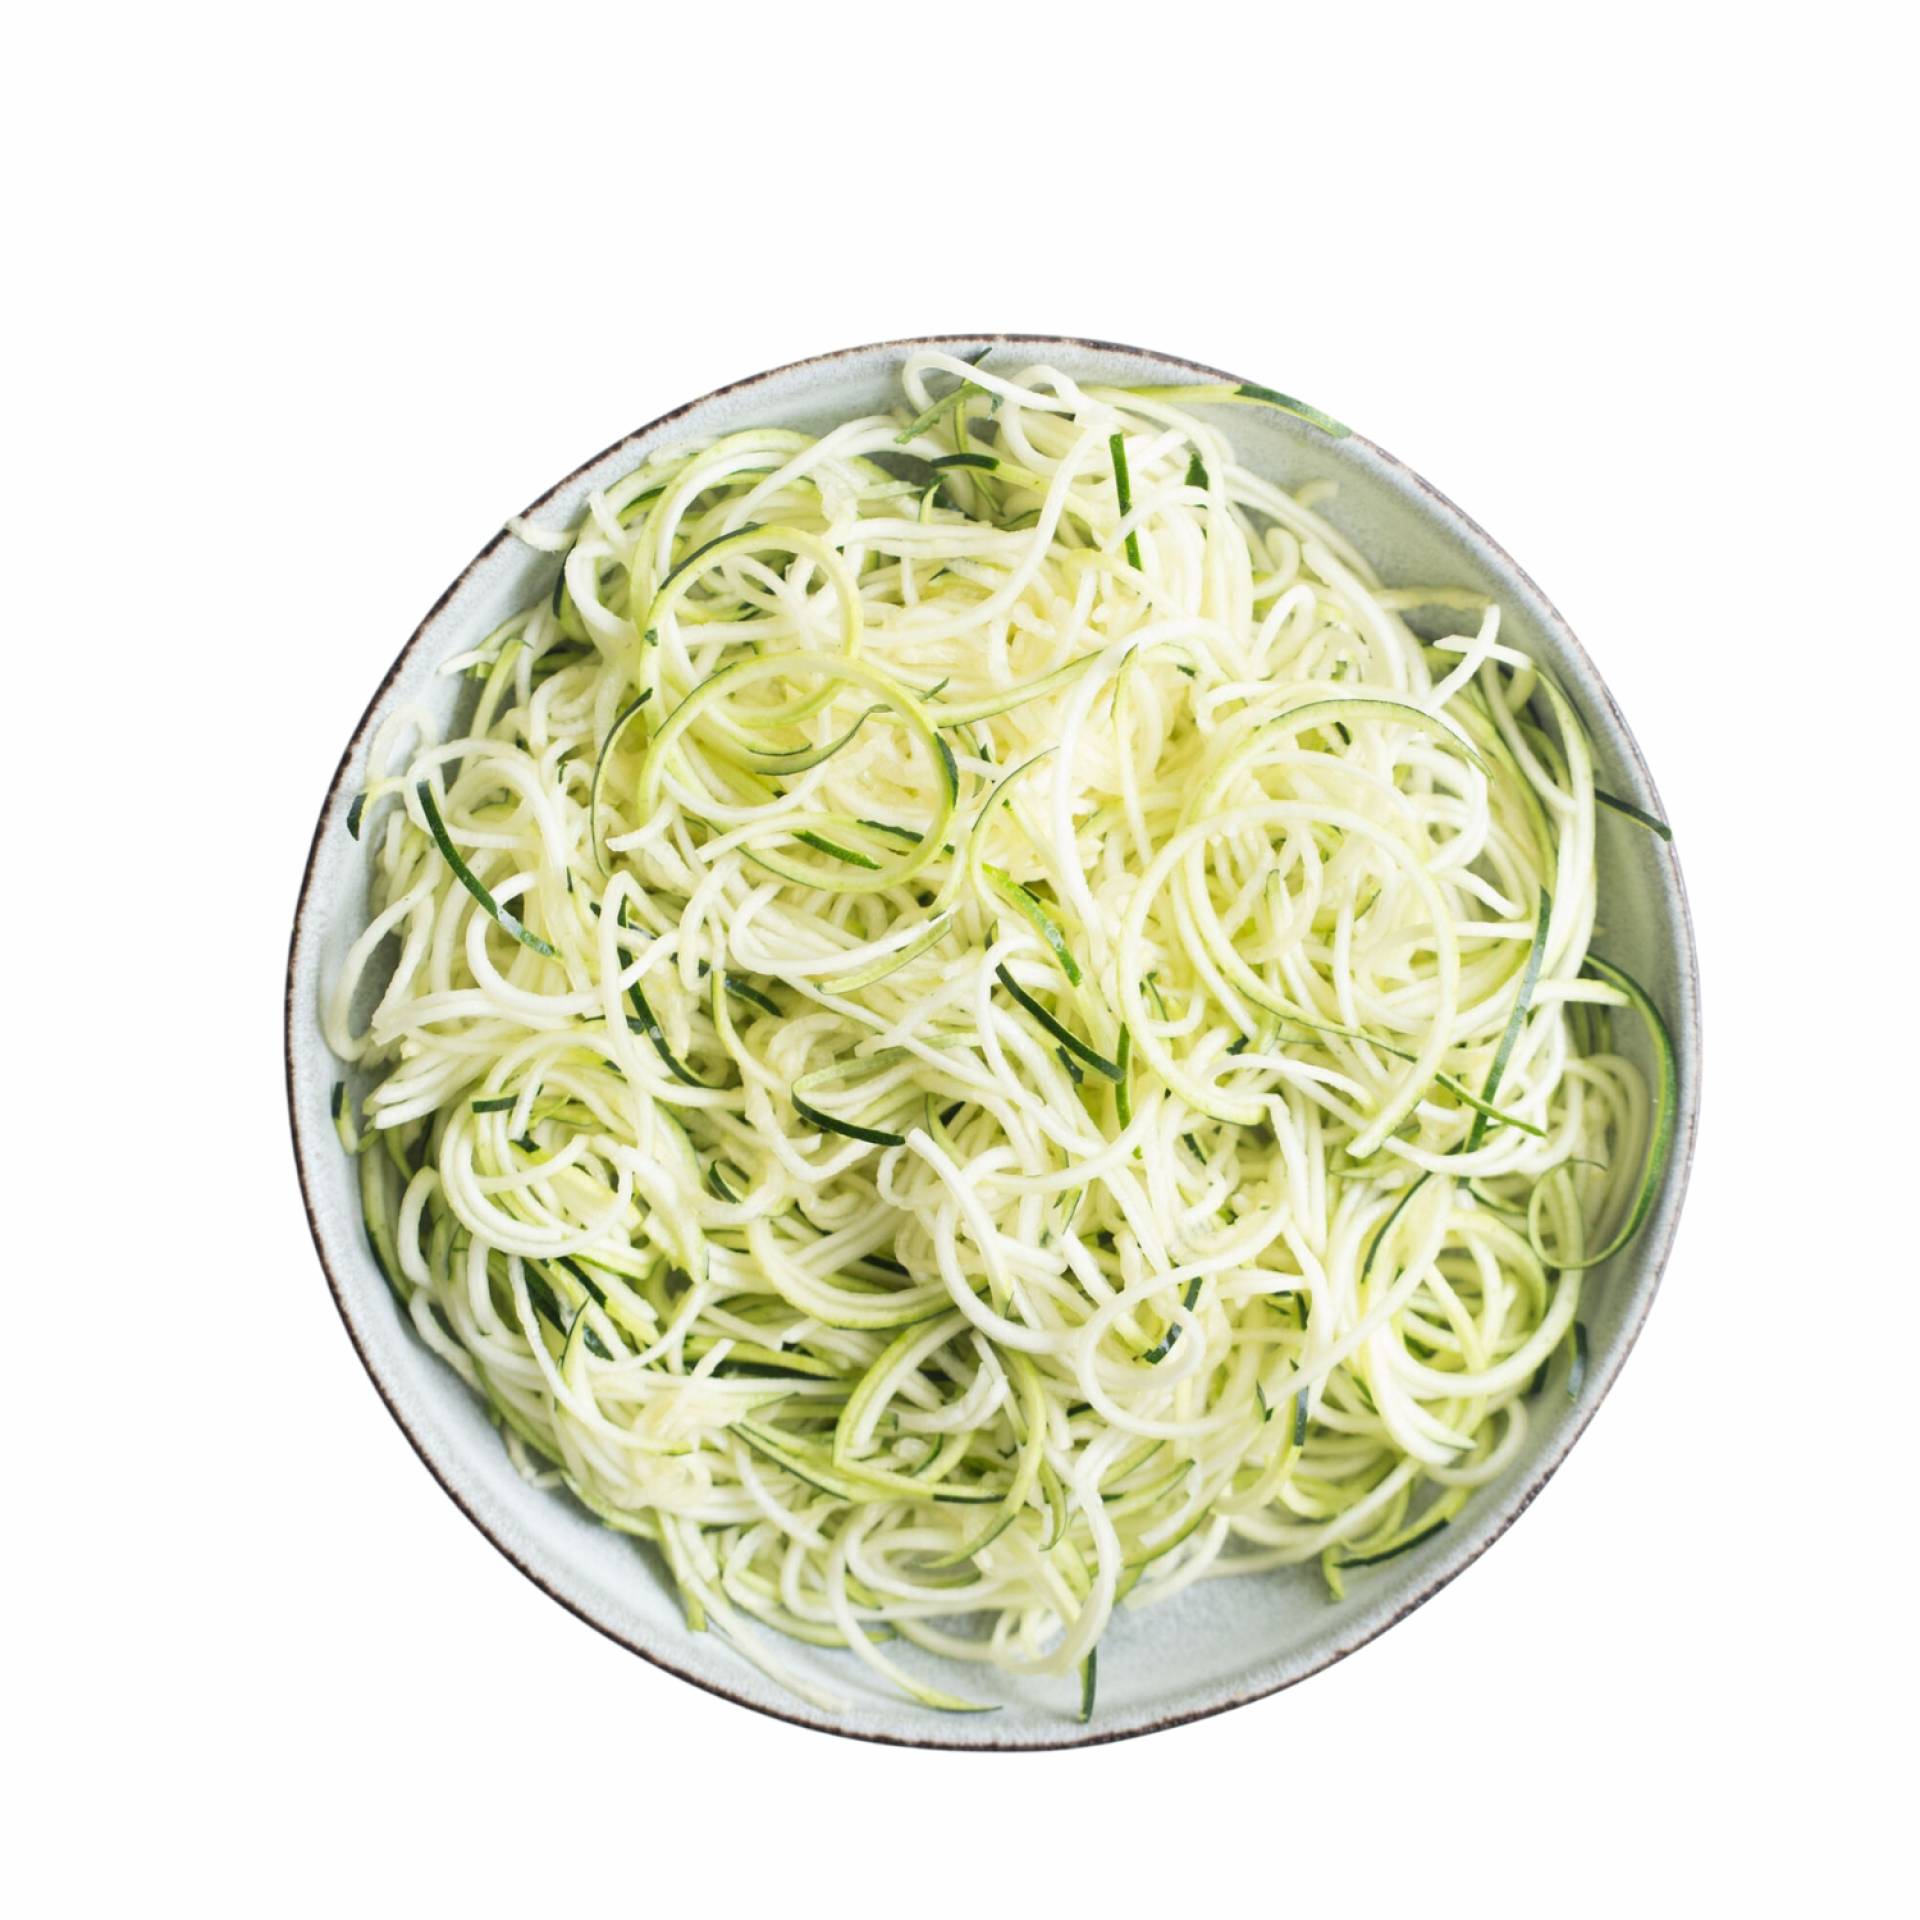 Zucchini Noodles - No Sauce (Ready to Eat)